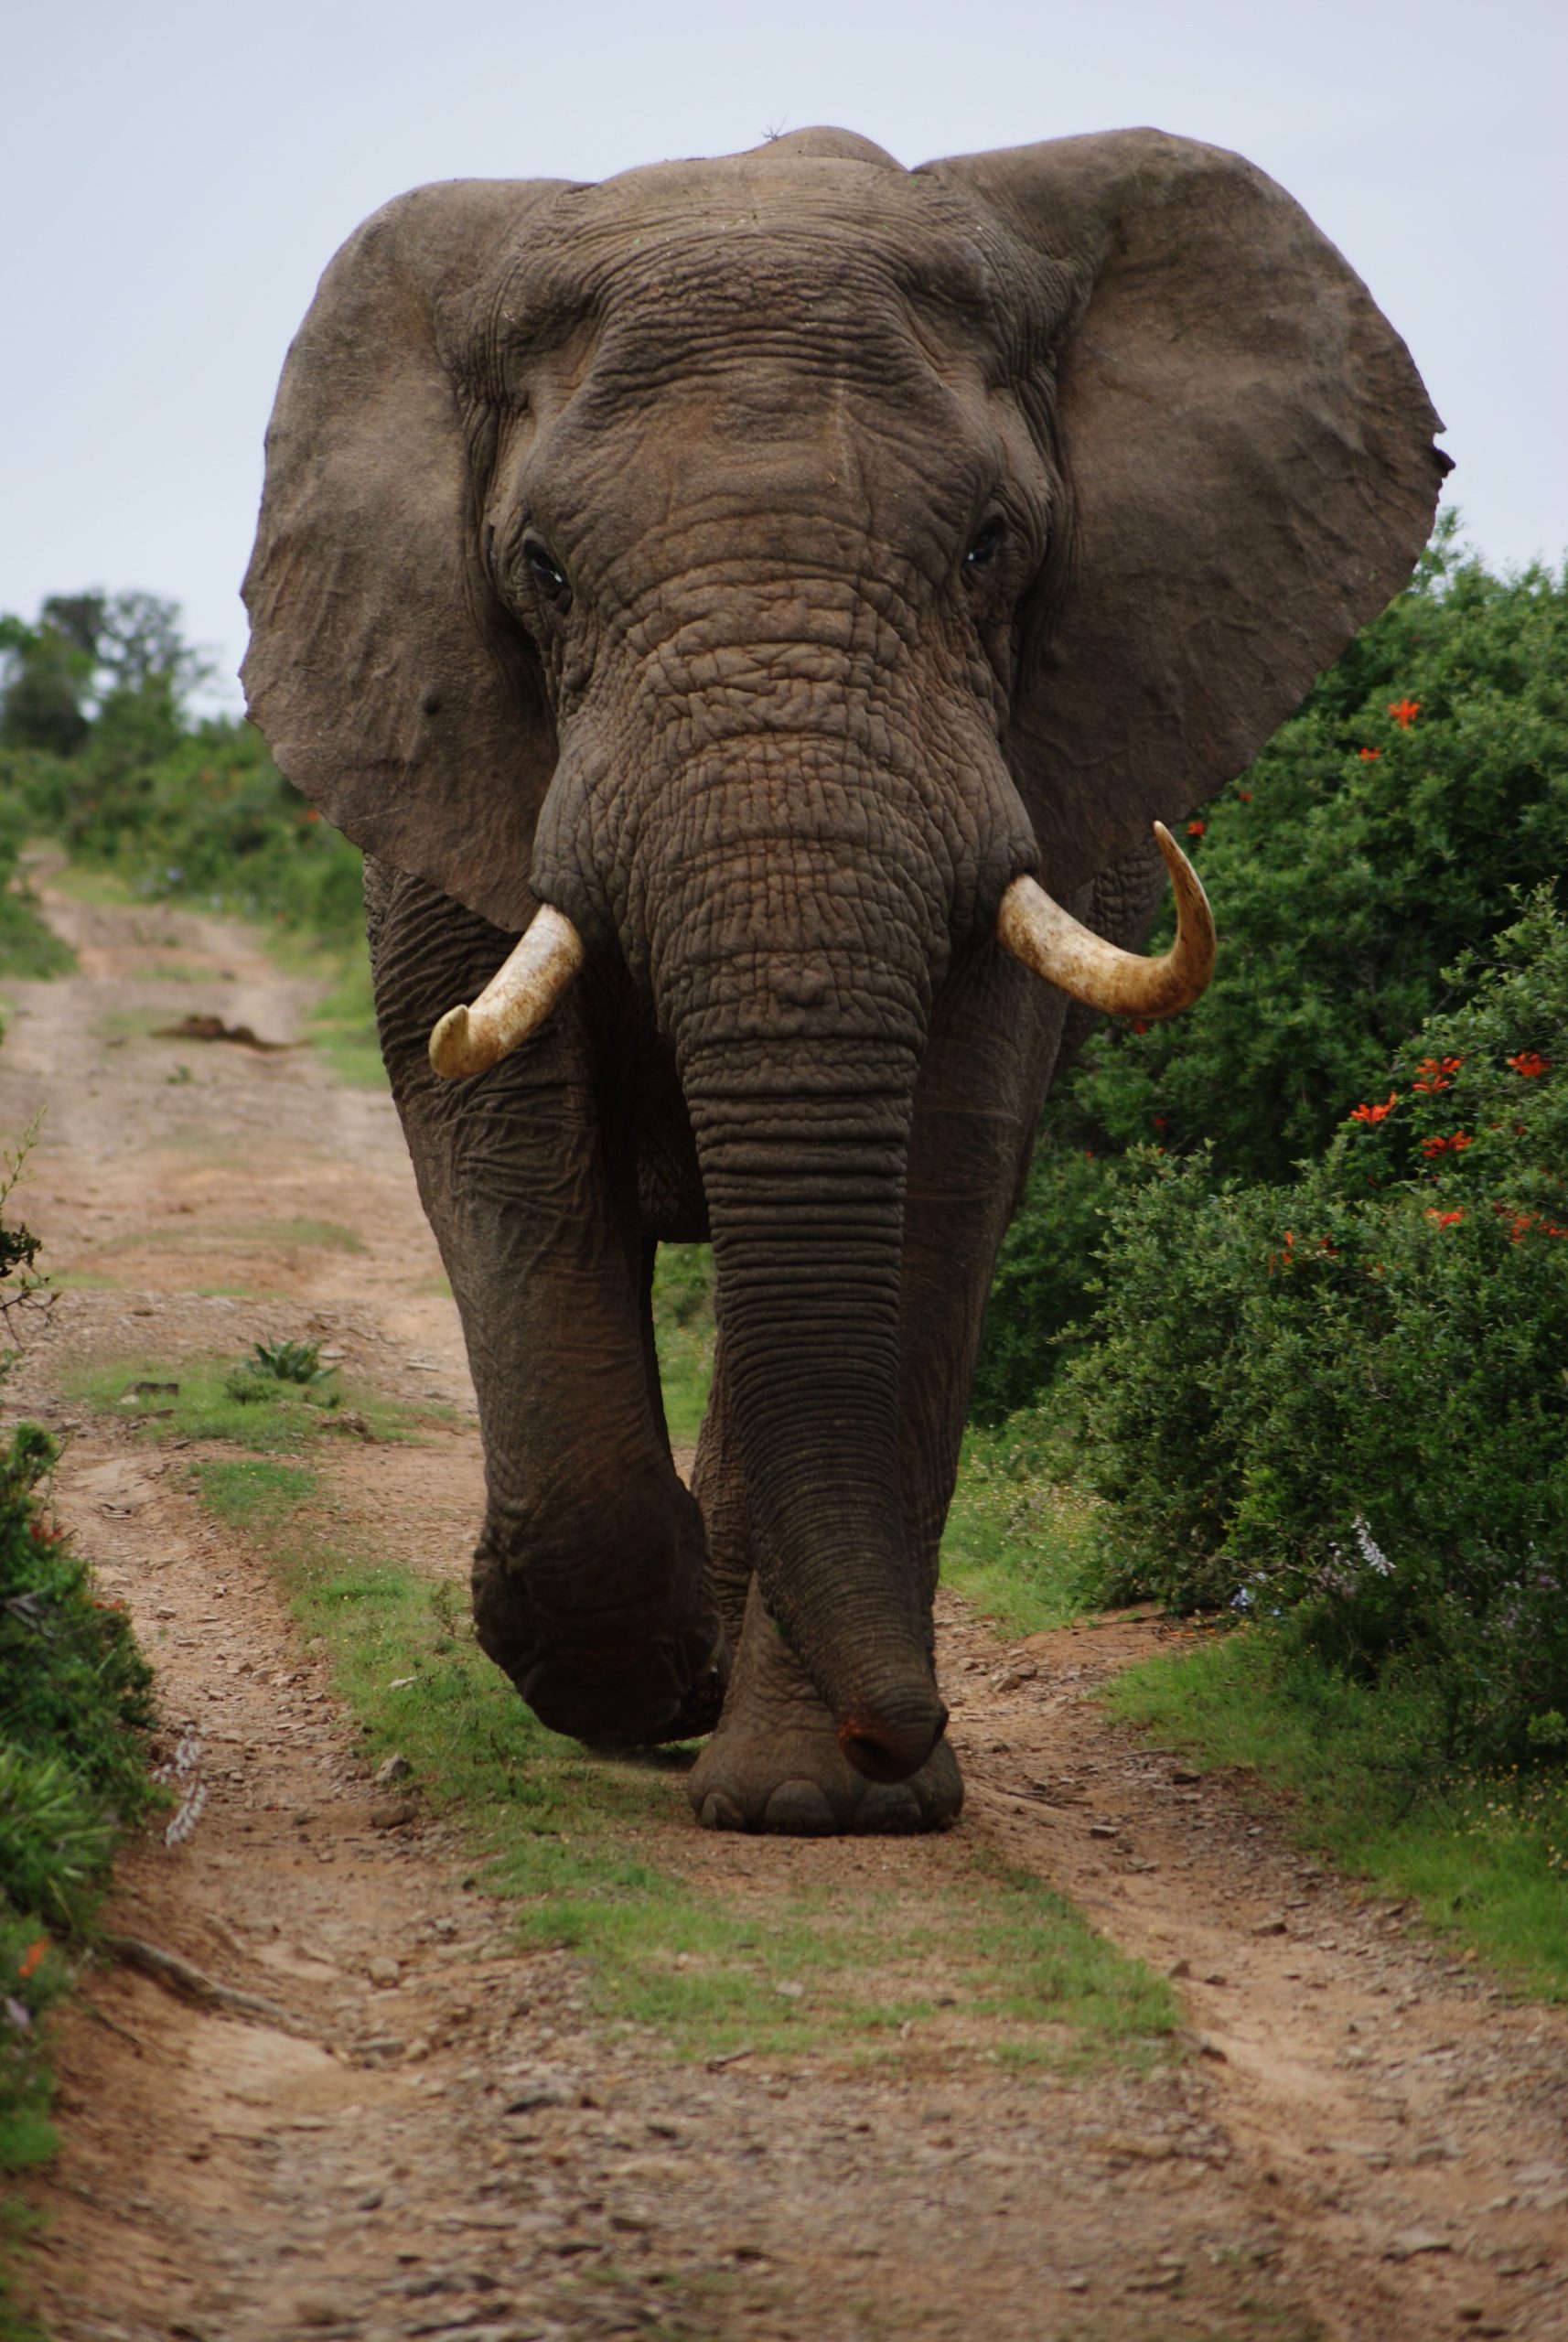 Elephant walks down a dirt road in South Africa